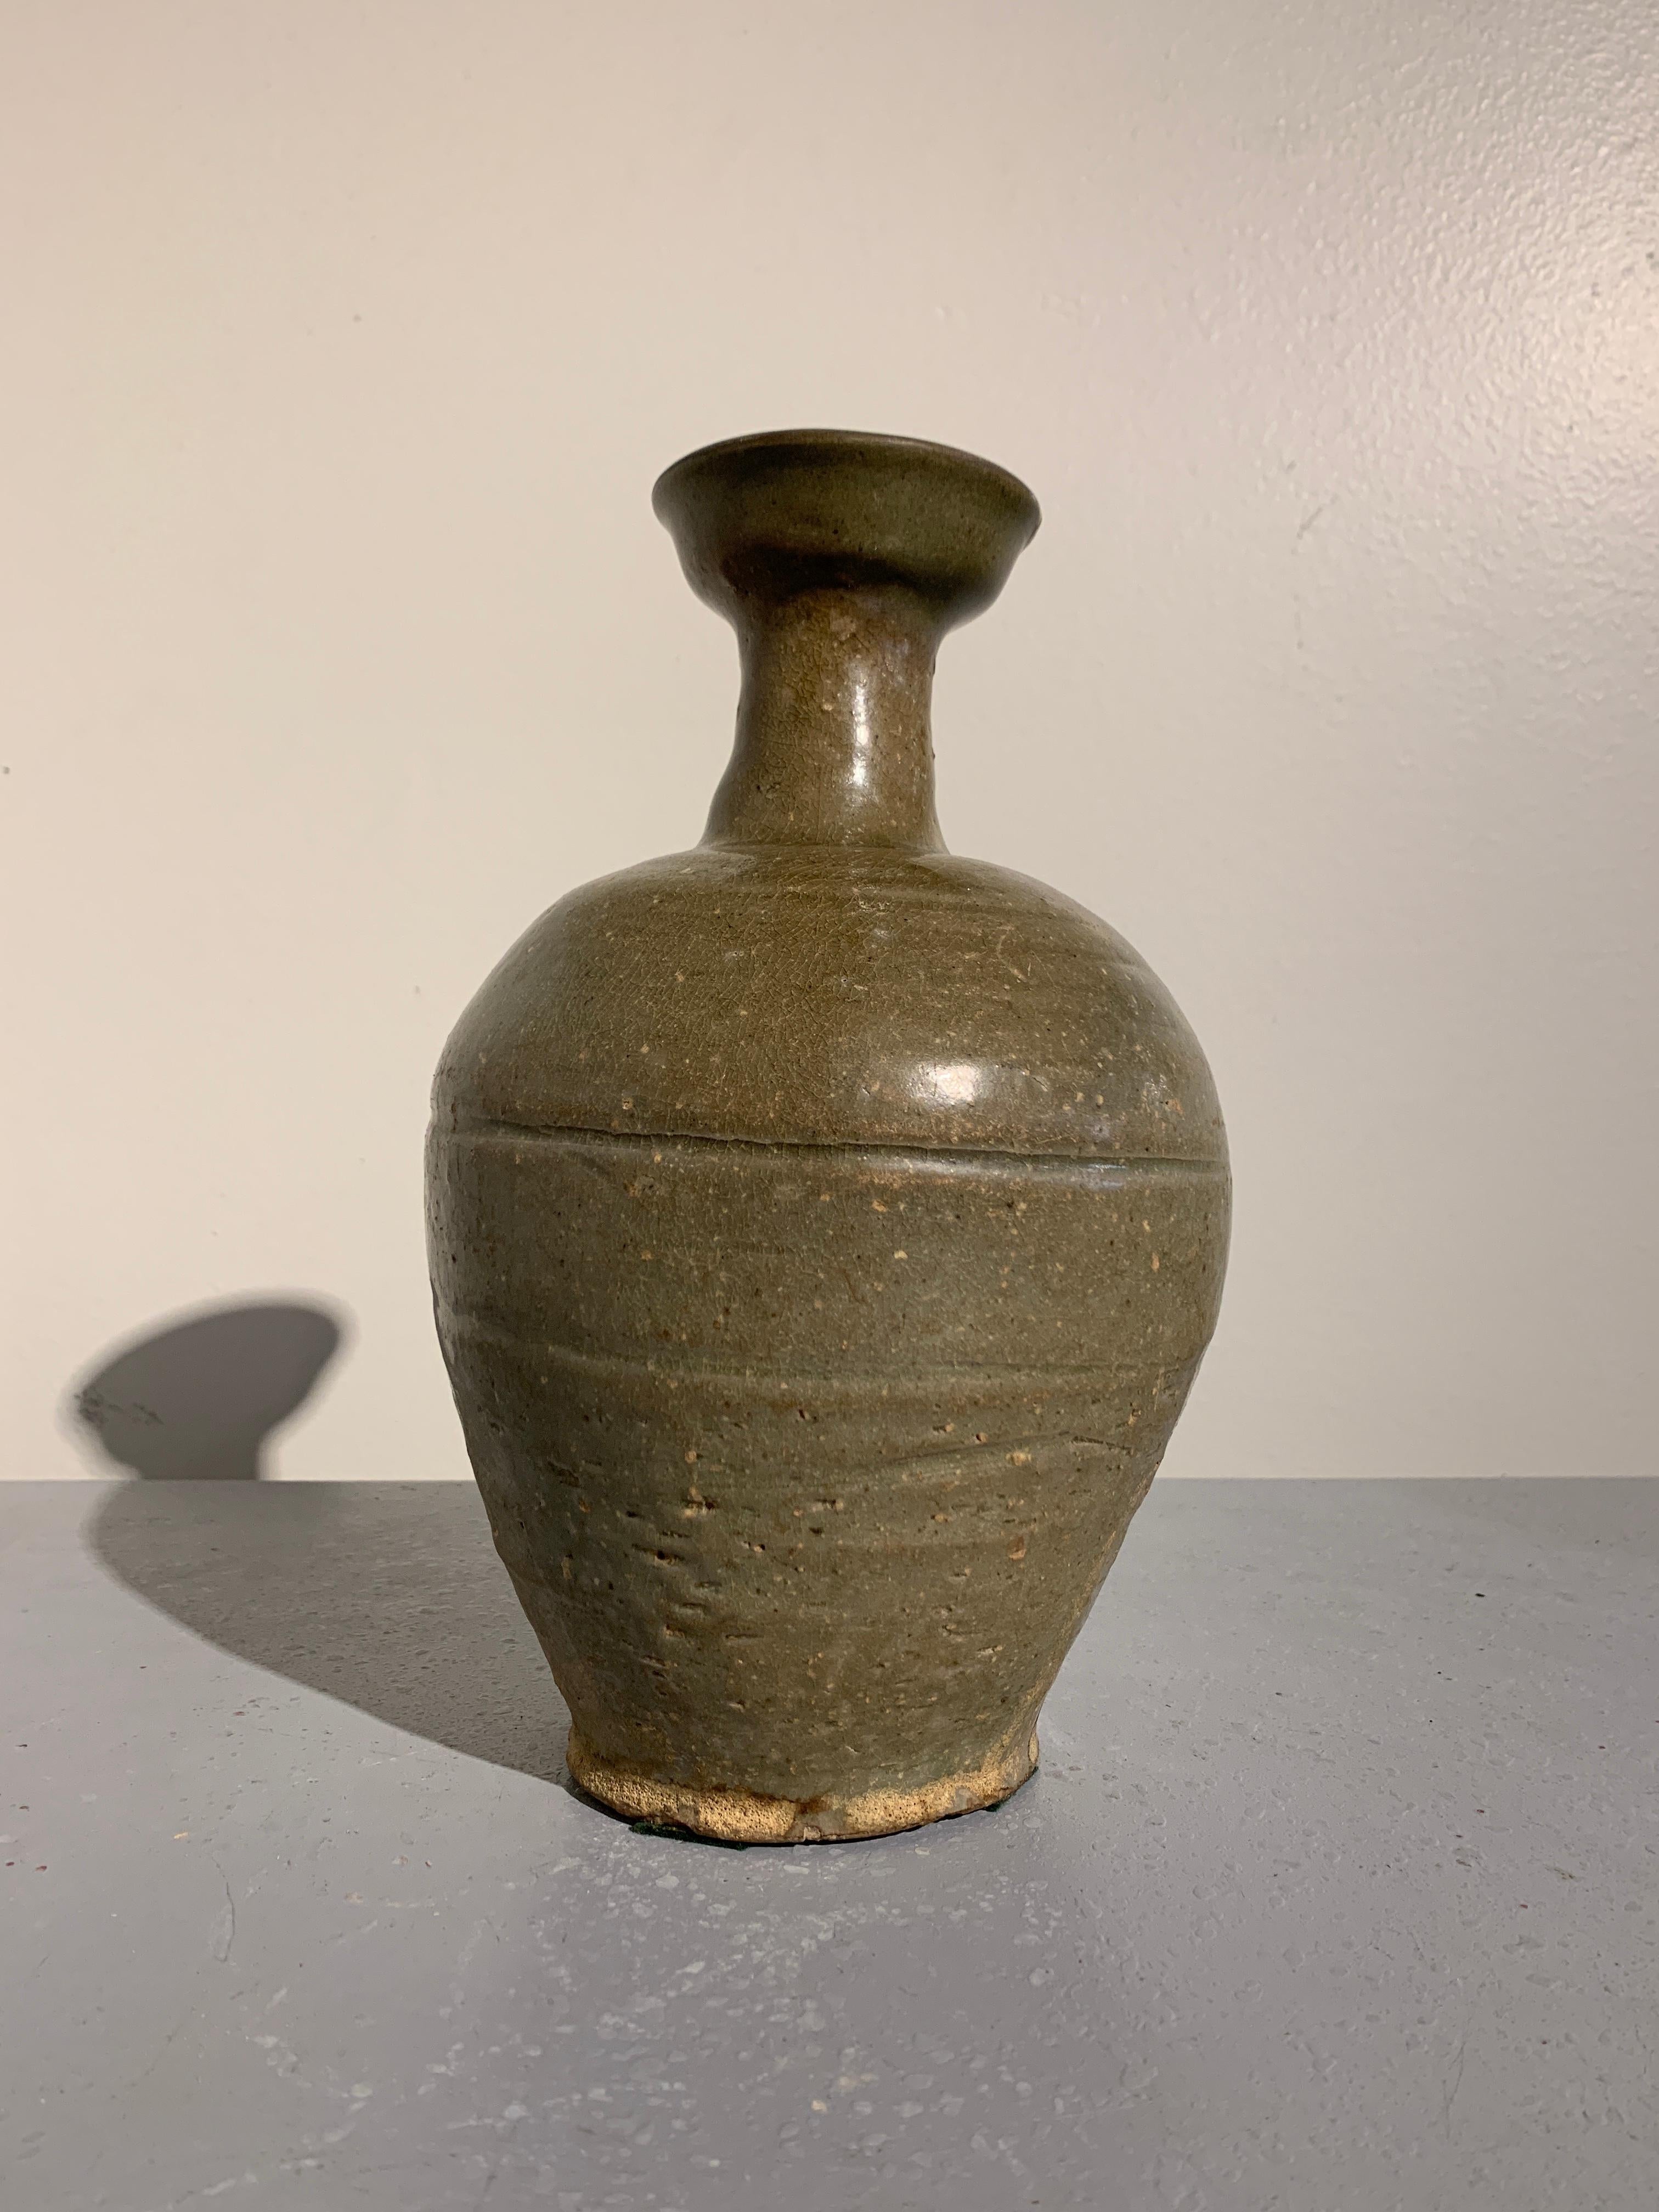 A sublime Korean celadon glazed cup mouth bottle vase, Goryeo Dynasty, 12th century, Korea.

The elegant bottle vase, originally used to serve wine, features a gorgeous Goryeo celadon glaze. The body of baluster form, with a notable lean, plainly